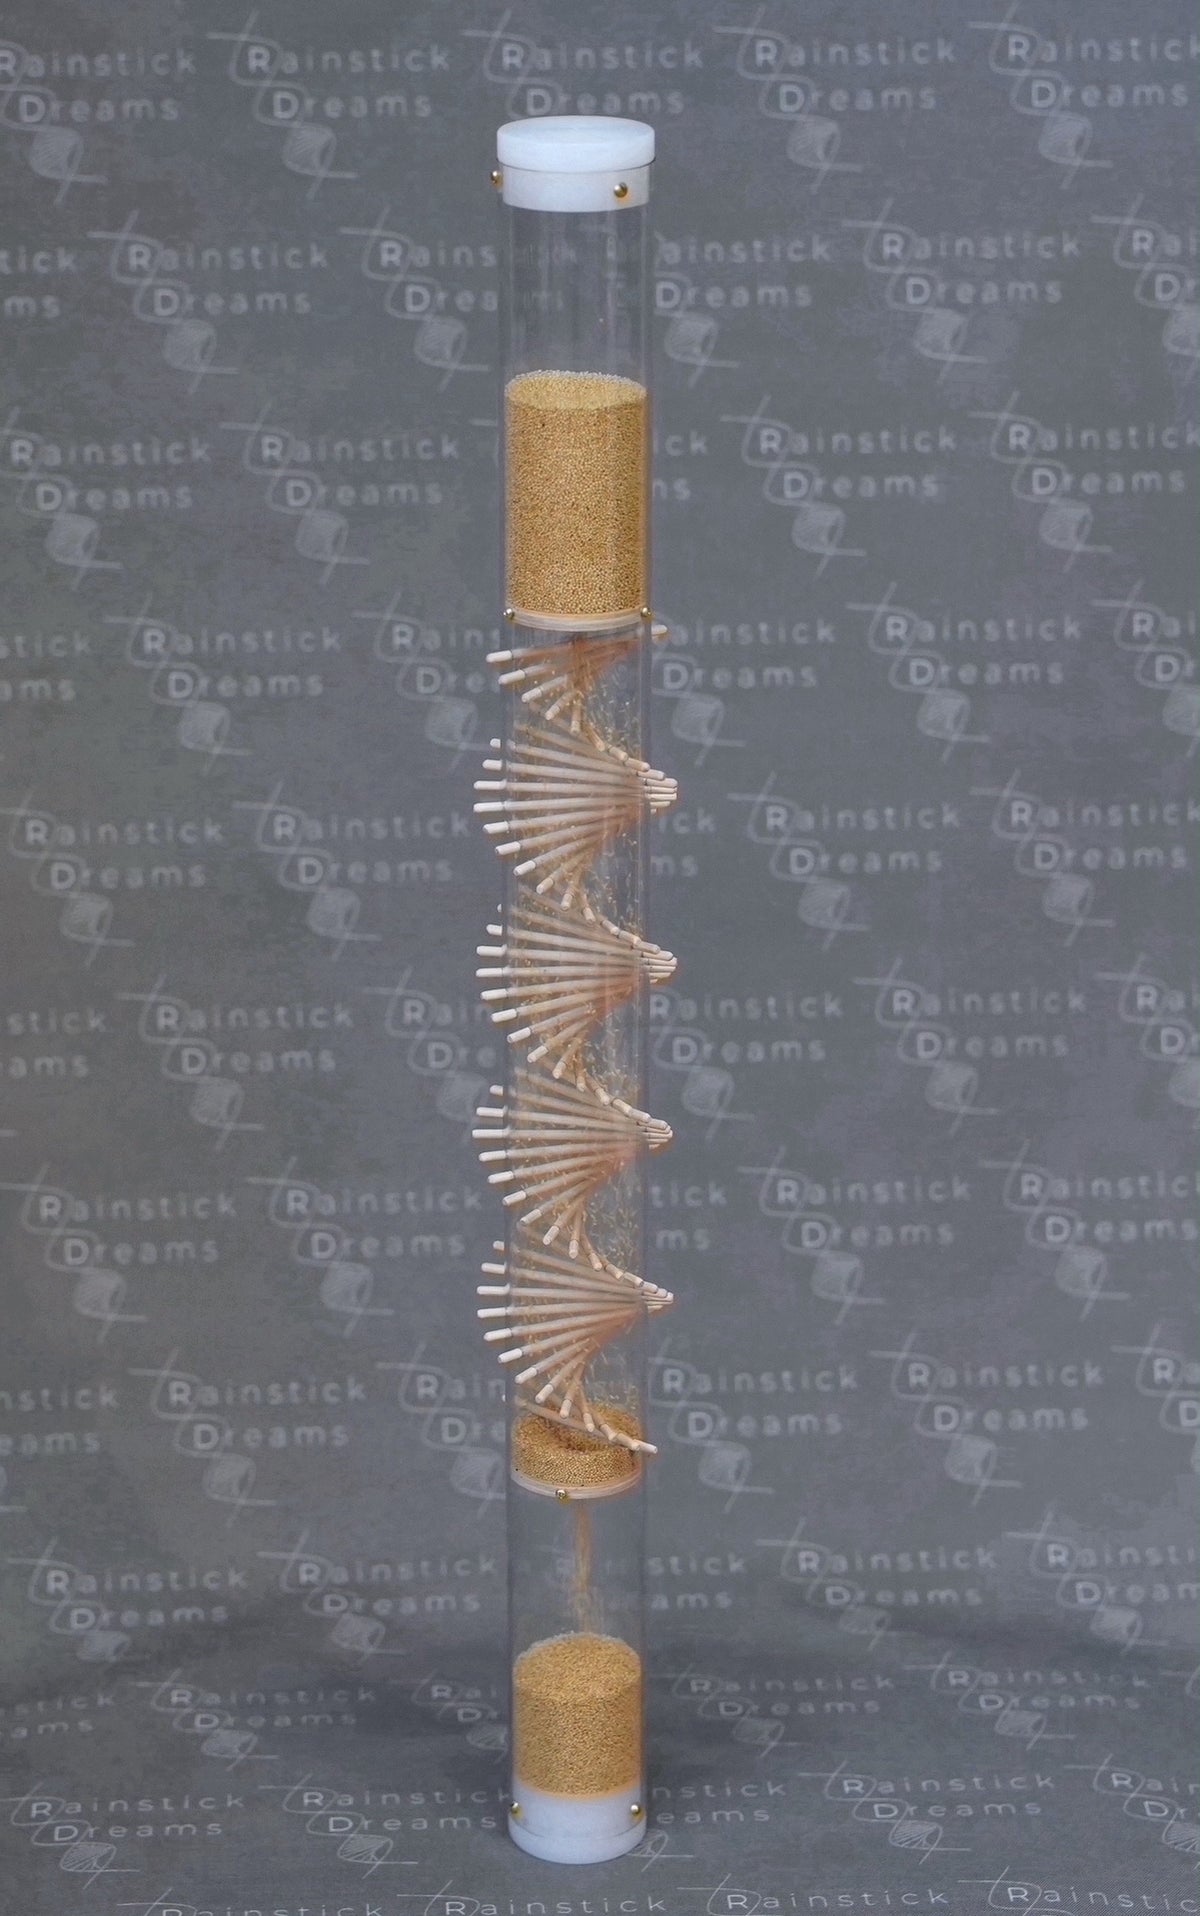 small amaranth spiral sounds rain stick by Rainstick Dreams. 2 minute timeout of peaceful rain sound for your desk, tabletop, bedside or mantle